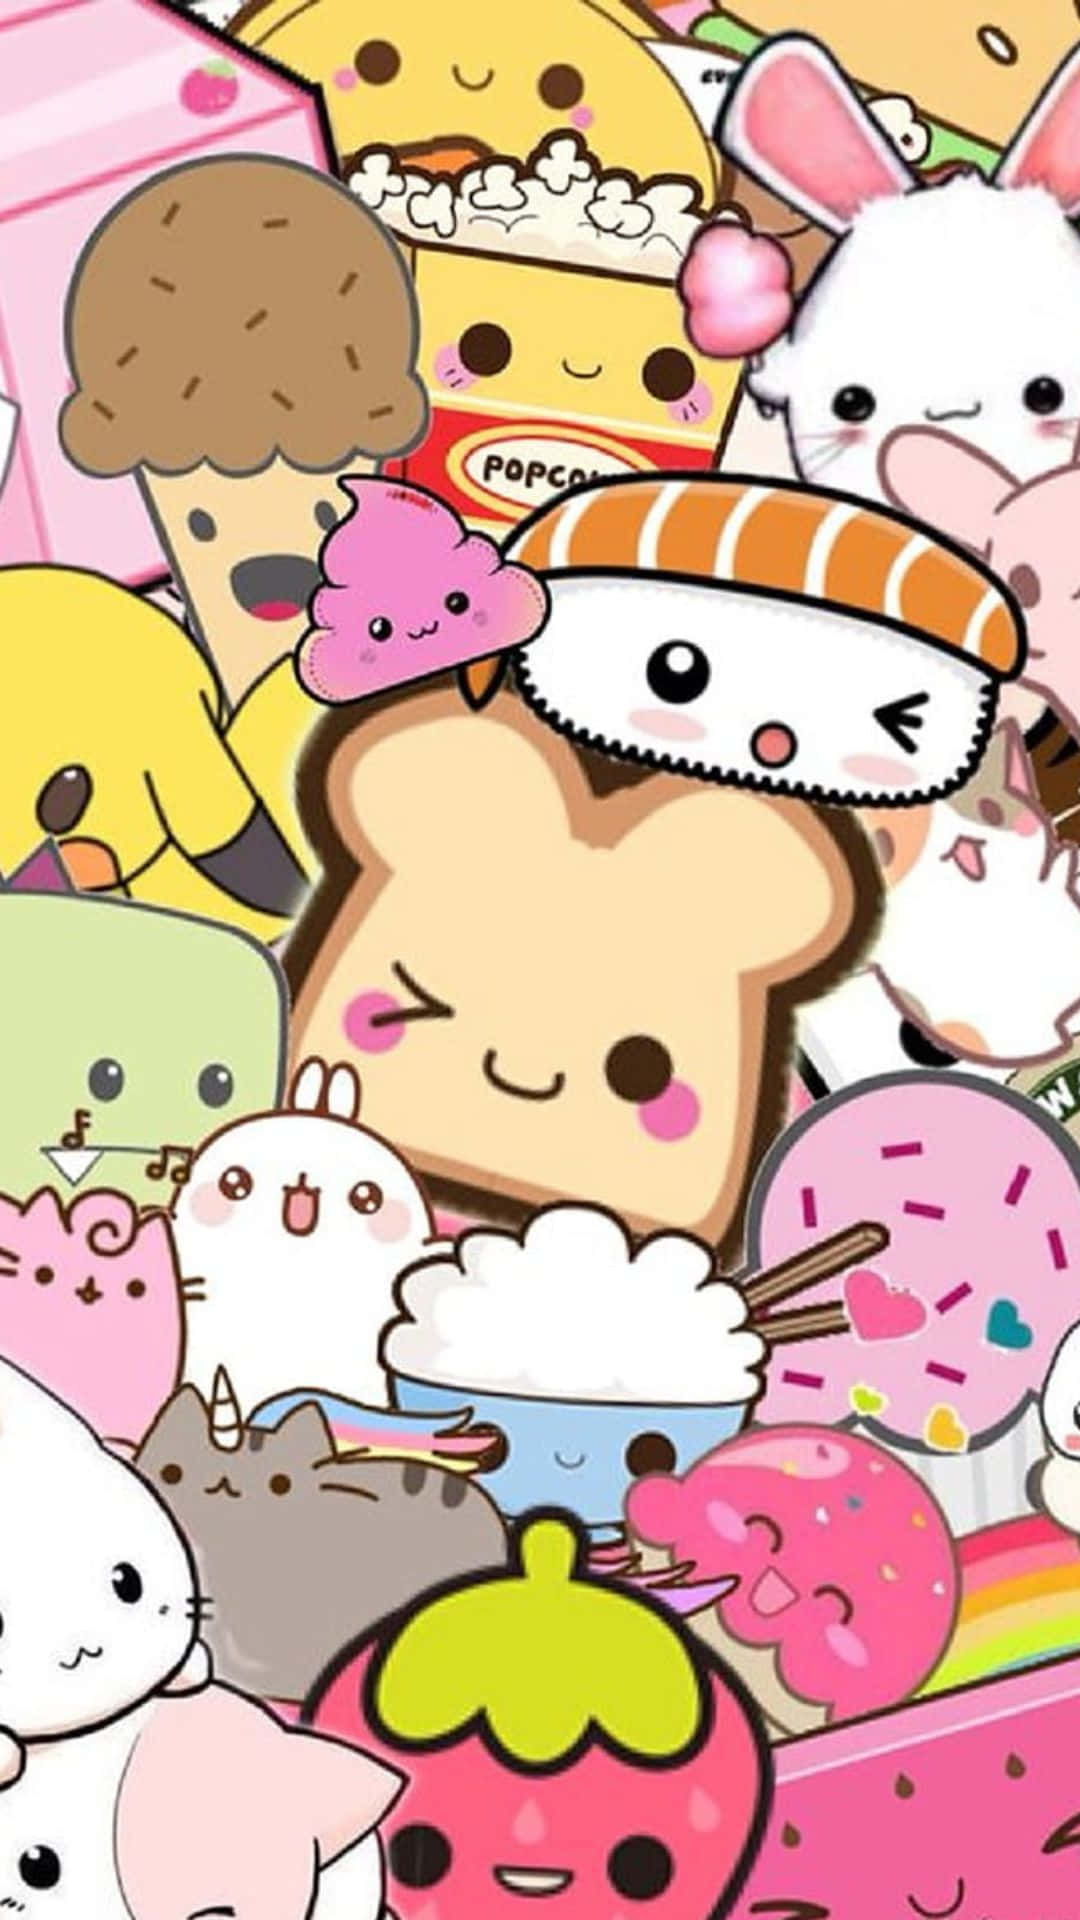 A collection of cute and colorful kawaii characters Wallpaper